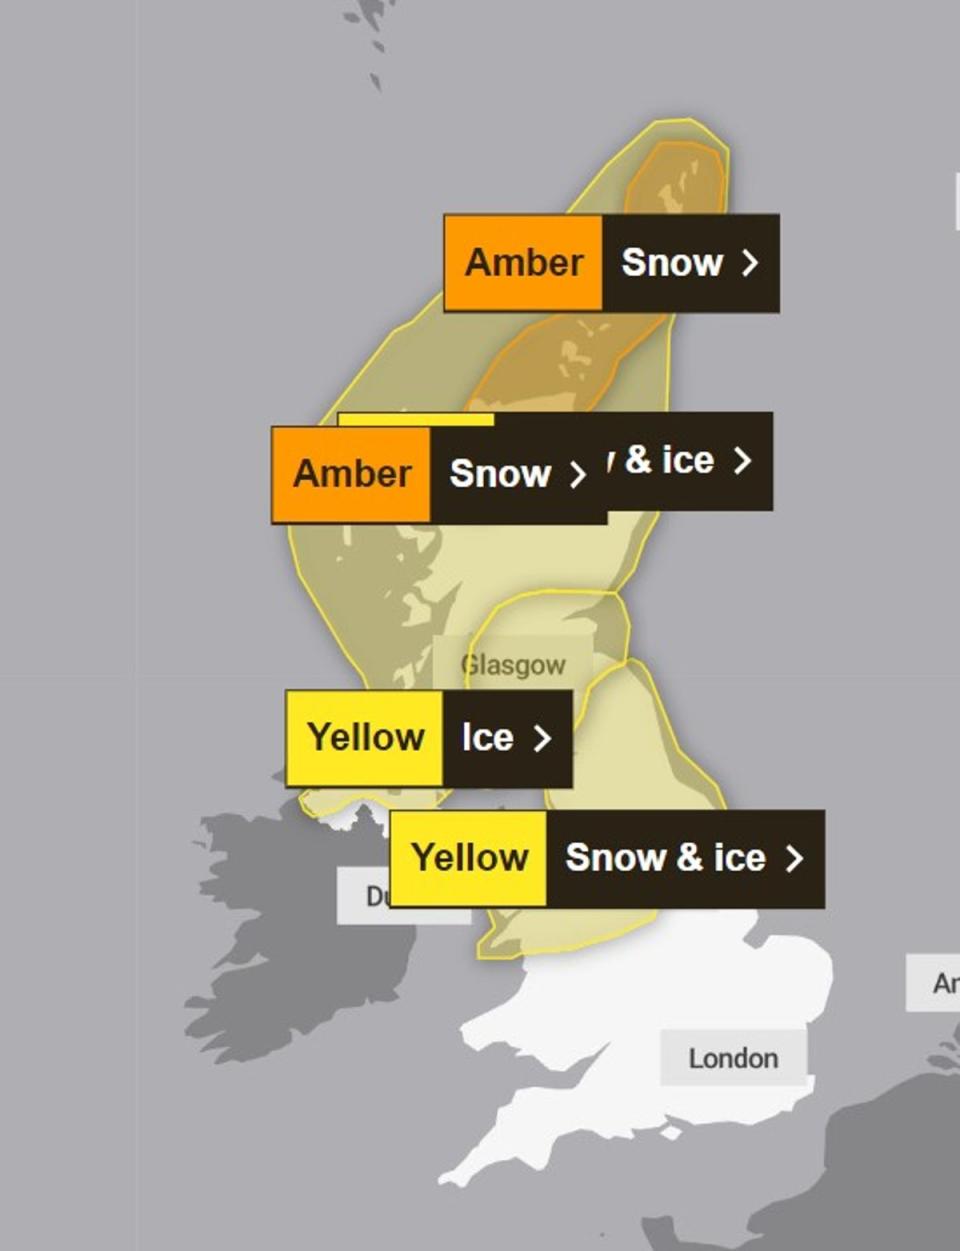 Amber and yellow warnings in place for 17/01 (Met Office)